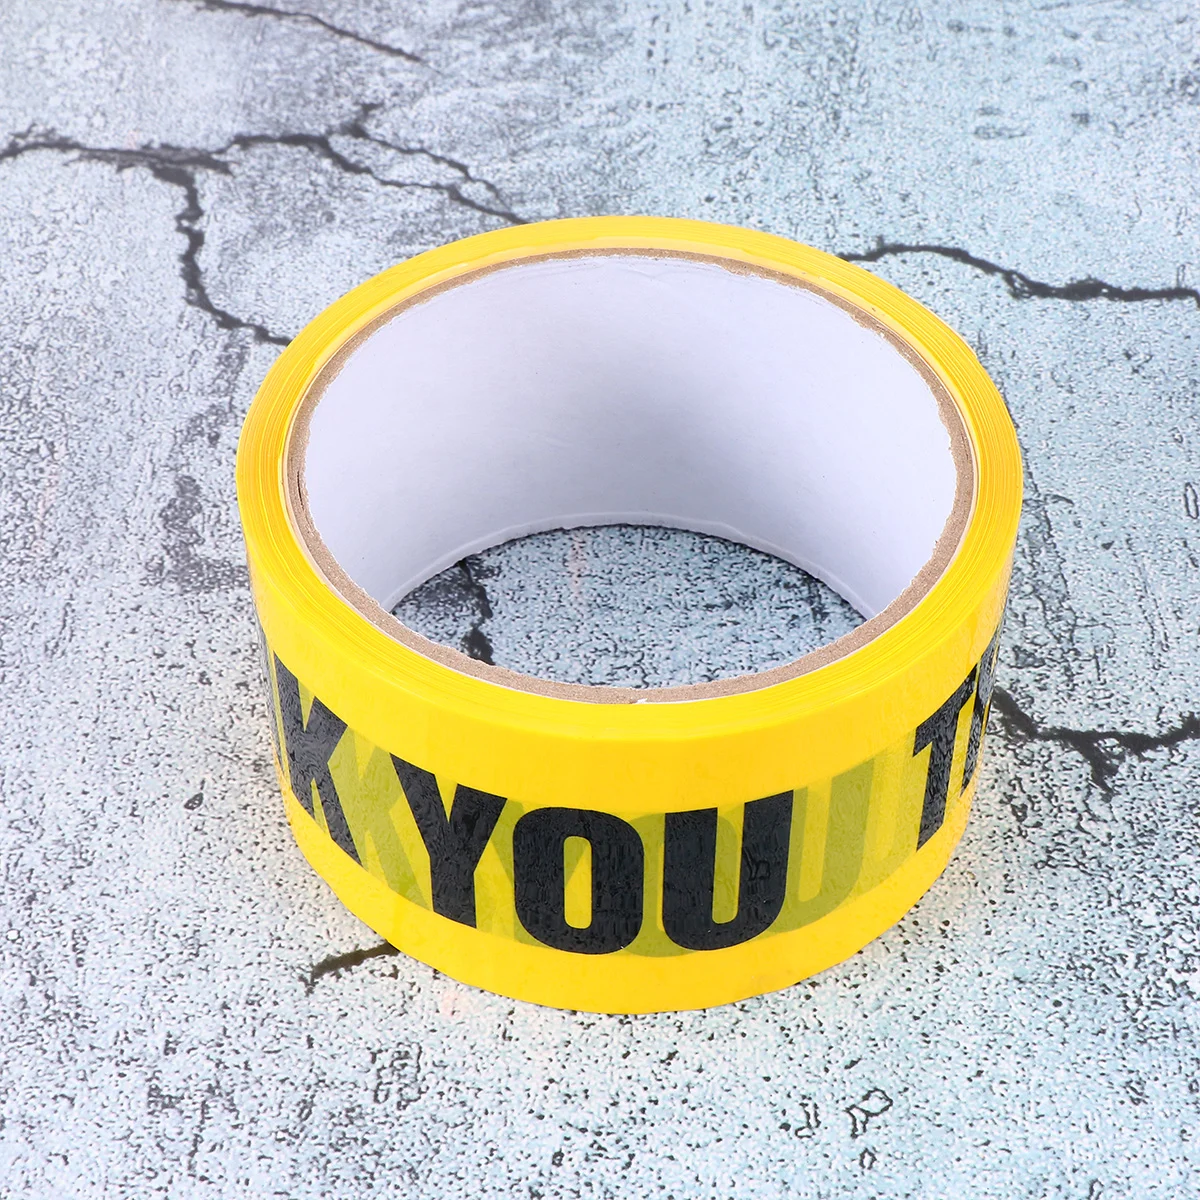 

1 Roll THANK YOU Safety Tape Safe Self Adhesive Sticker Warning Tape Masking Tape for Walls Floors Pipes (Yellow)